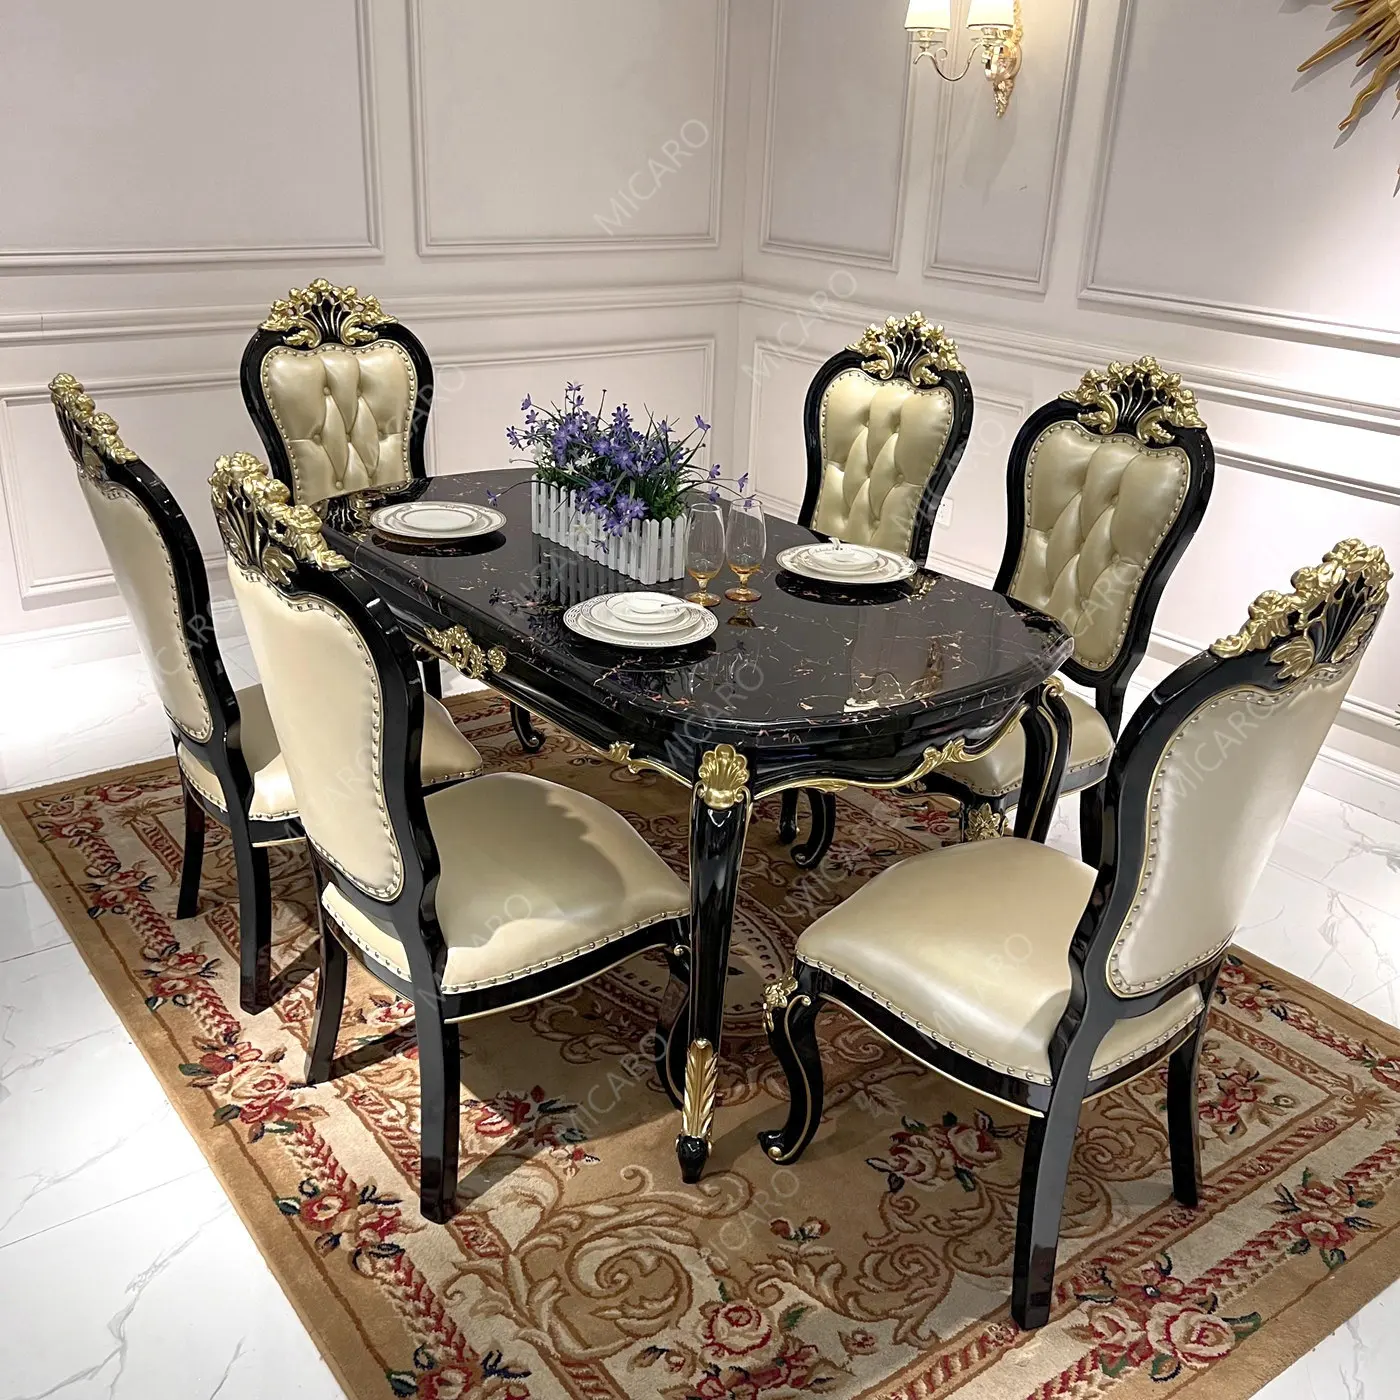 French model latest design of ebony black color marble top wooden antique dining table with 6 chairs